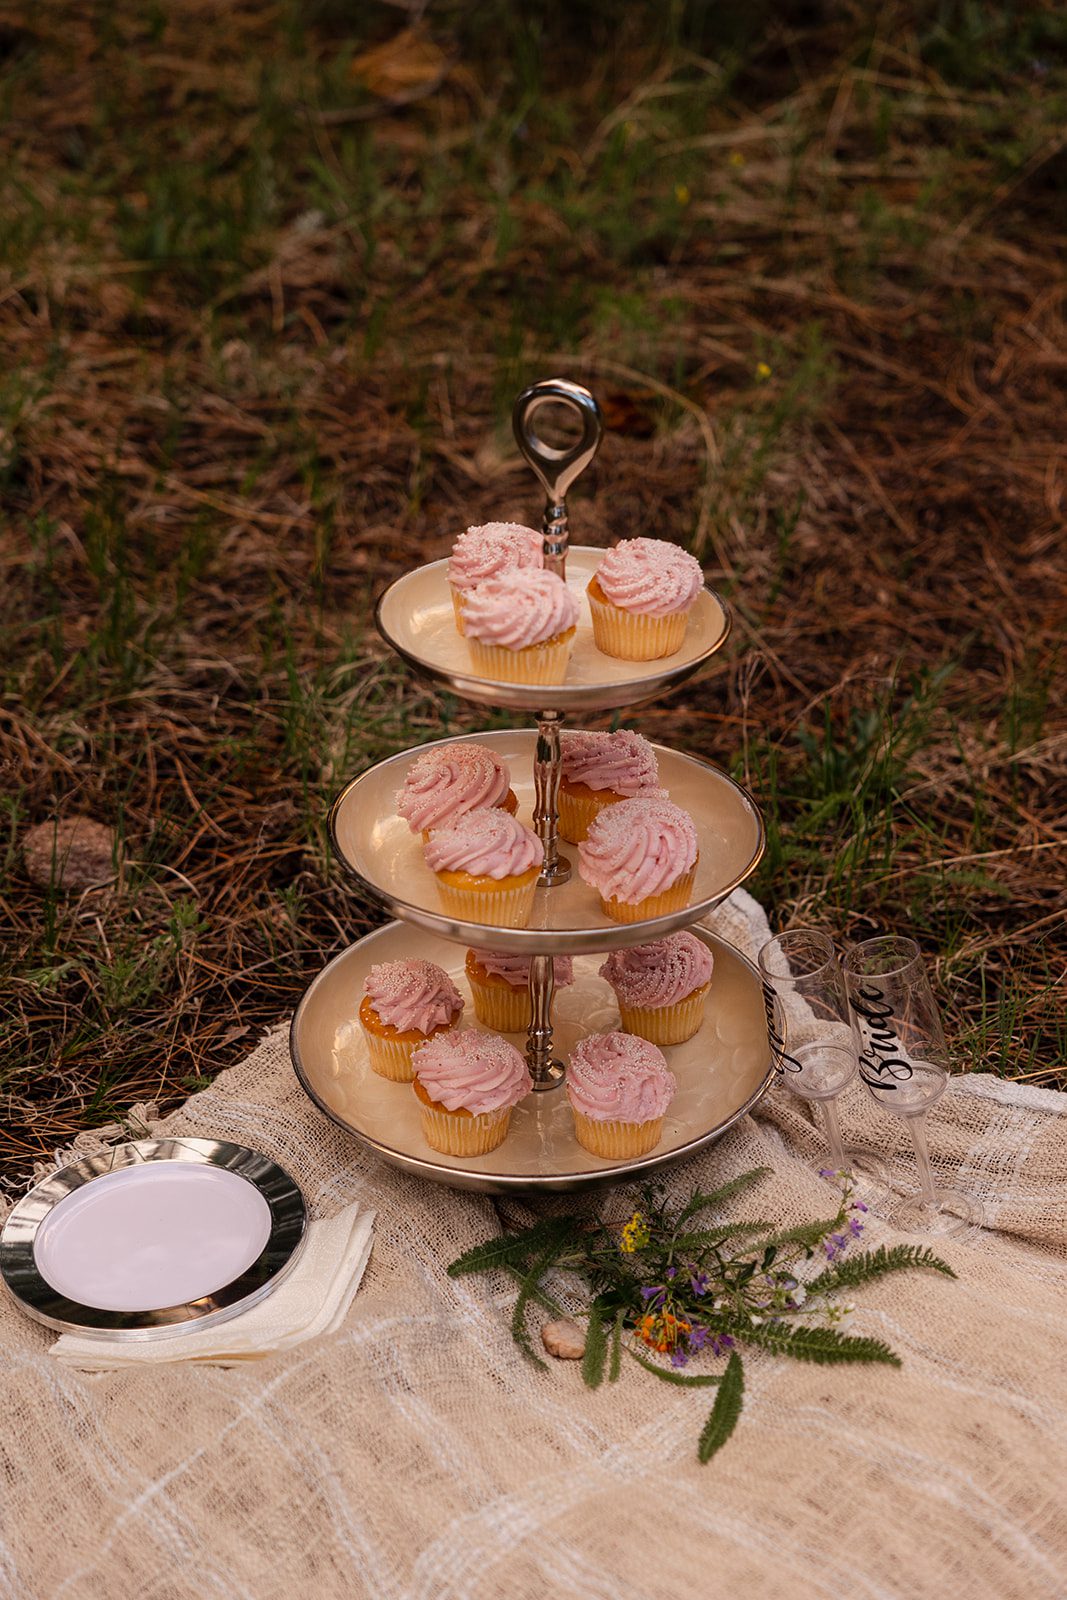 the bride and grooms cupcakes from heir Boulder elopement with videography.